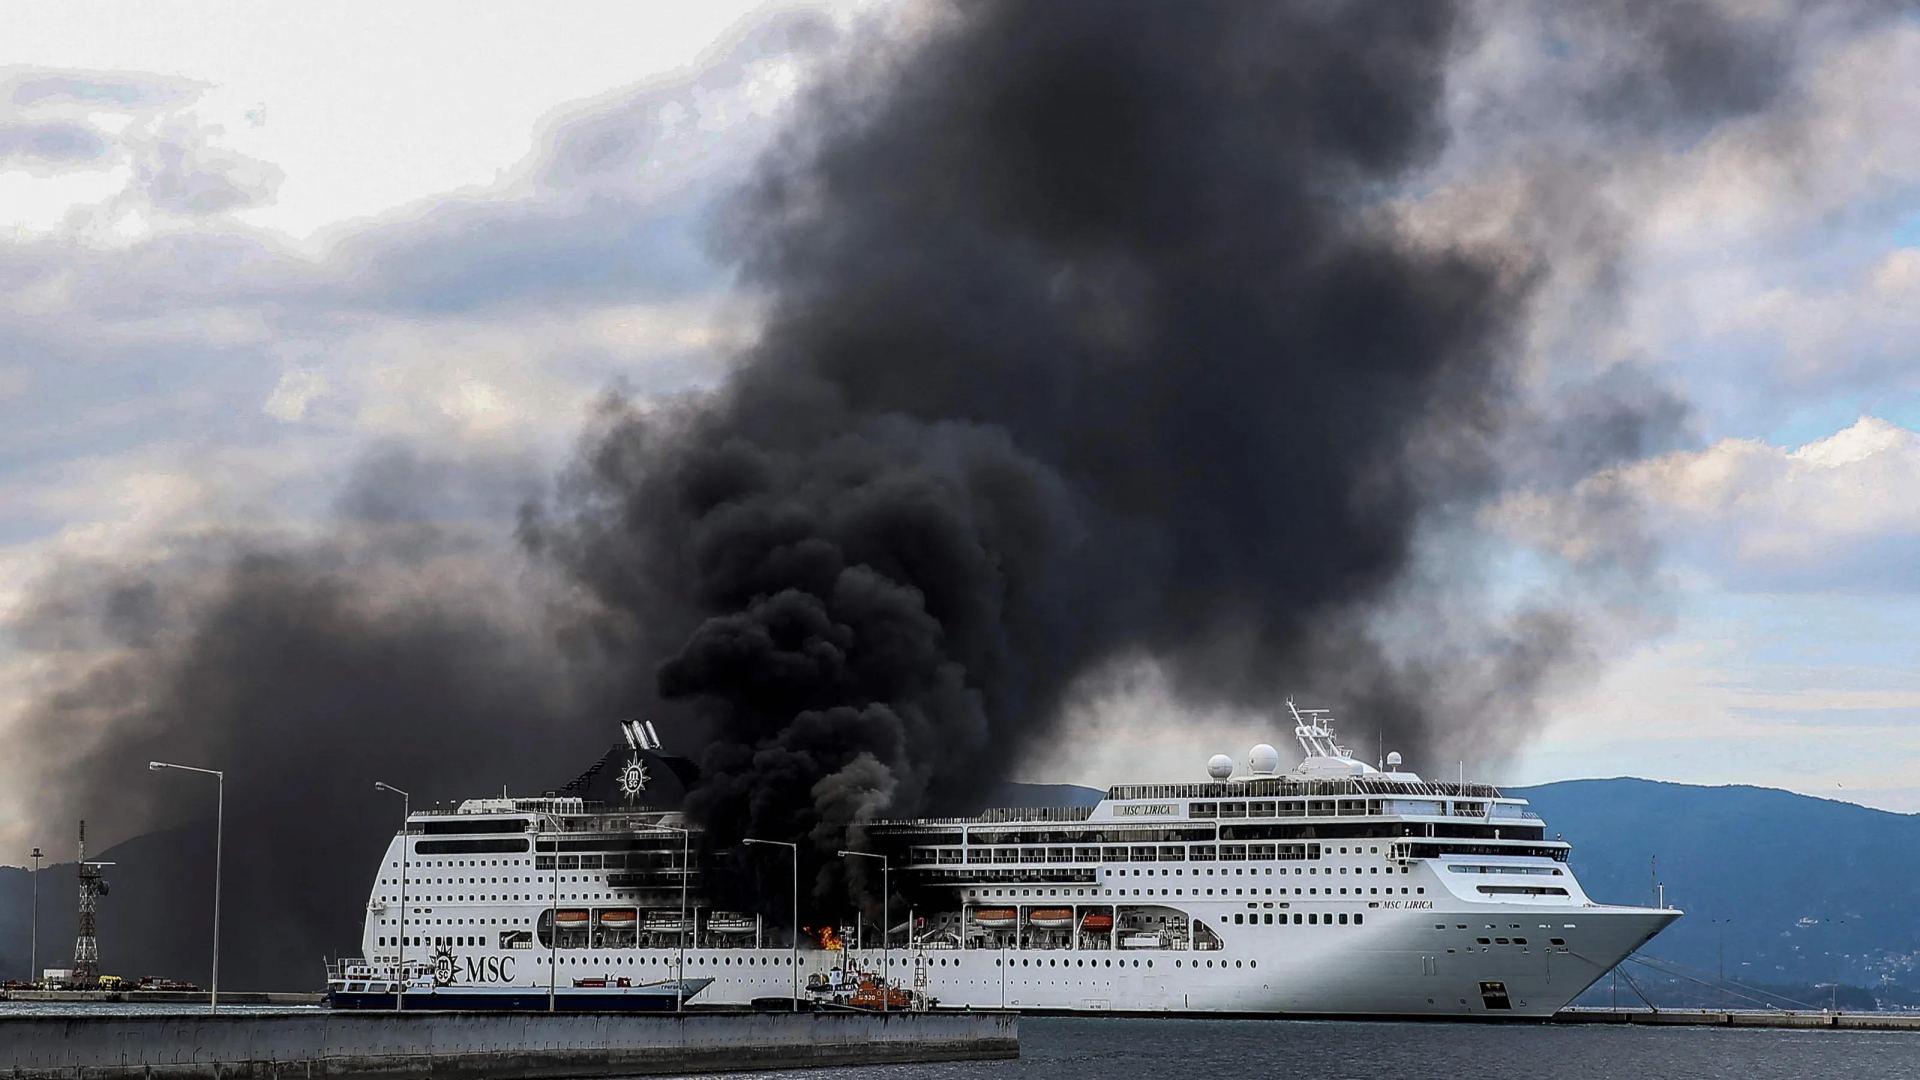 Passengers evacuated after fire on cruise ship in Sydney